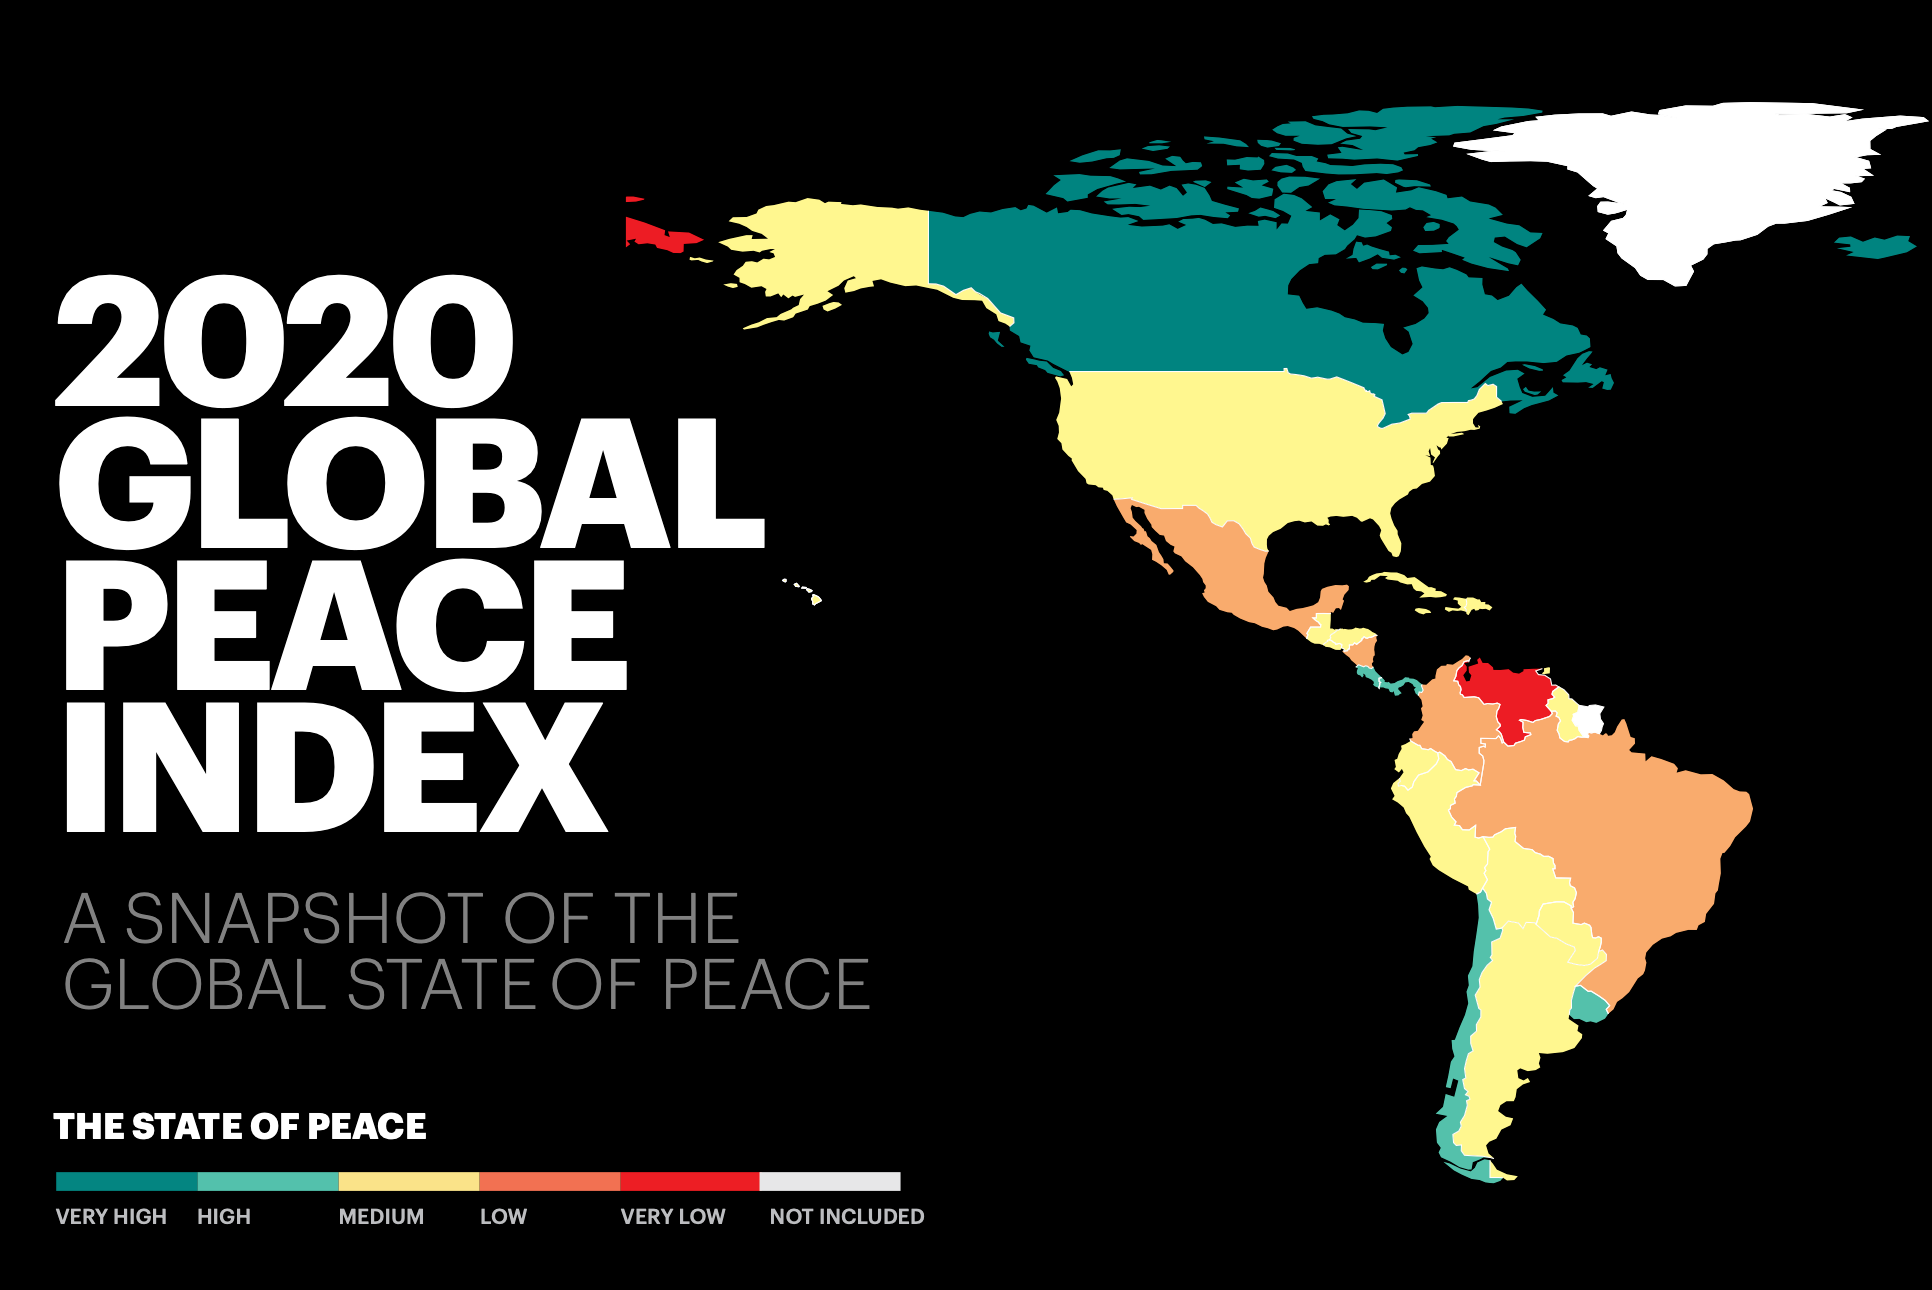 Malaysia ranked 4th most peaceful country in asia, higher than s. Korea and taiwan